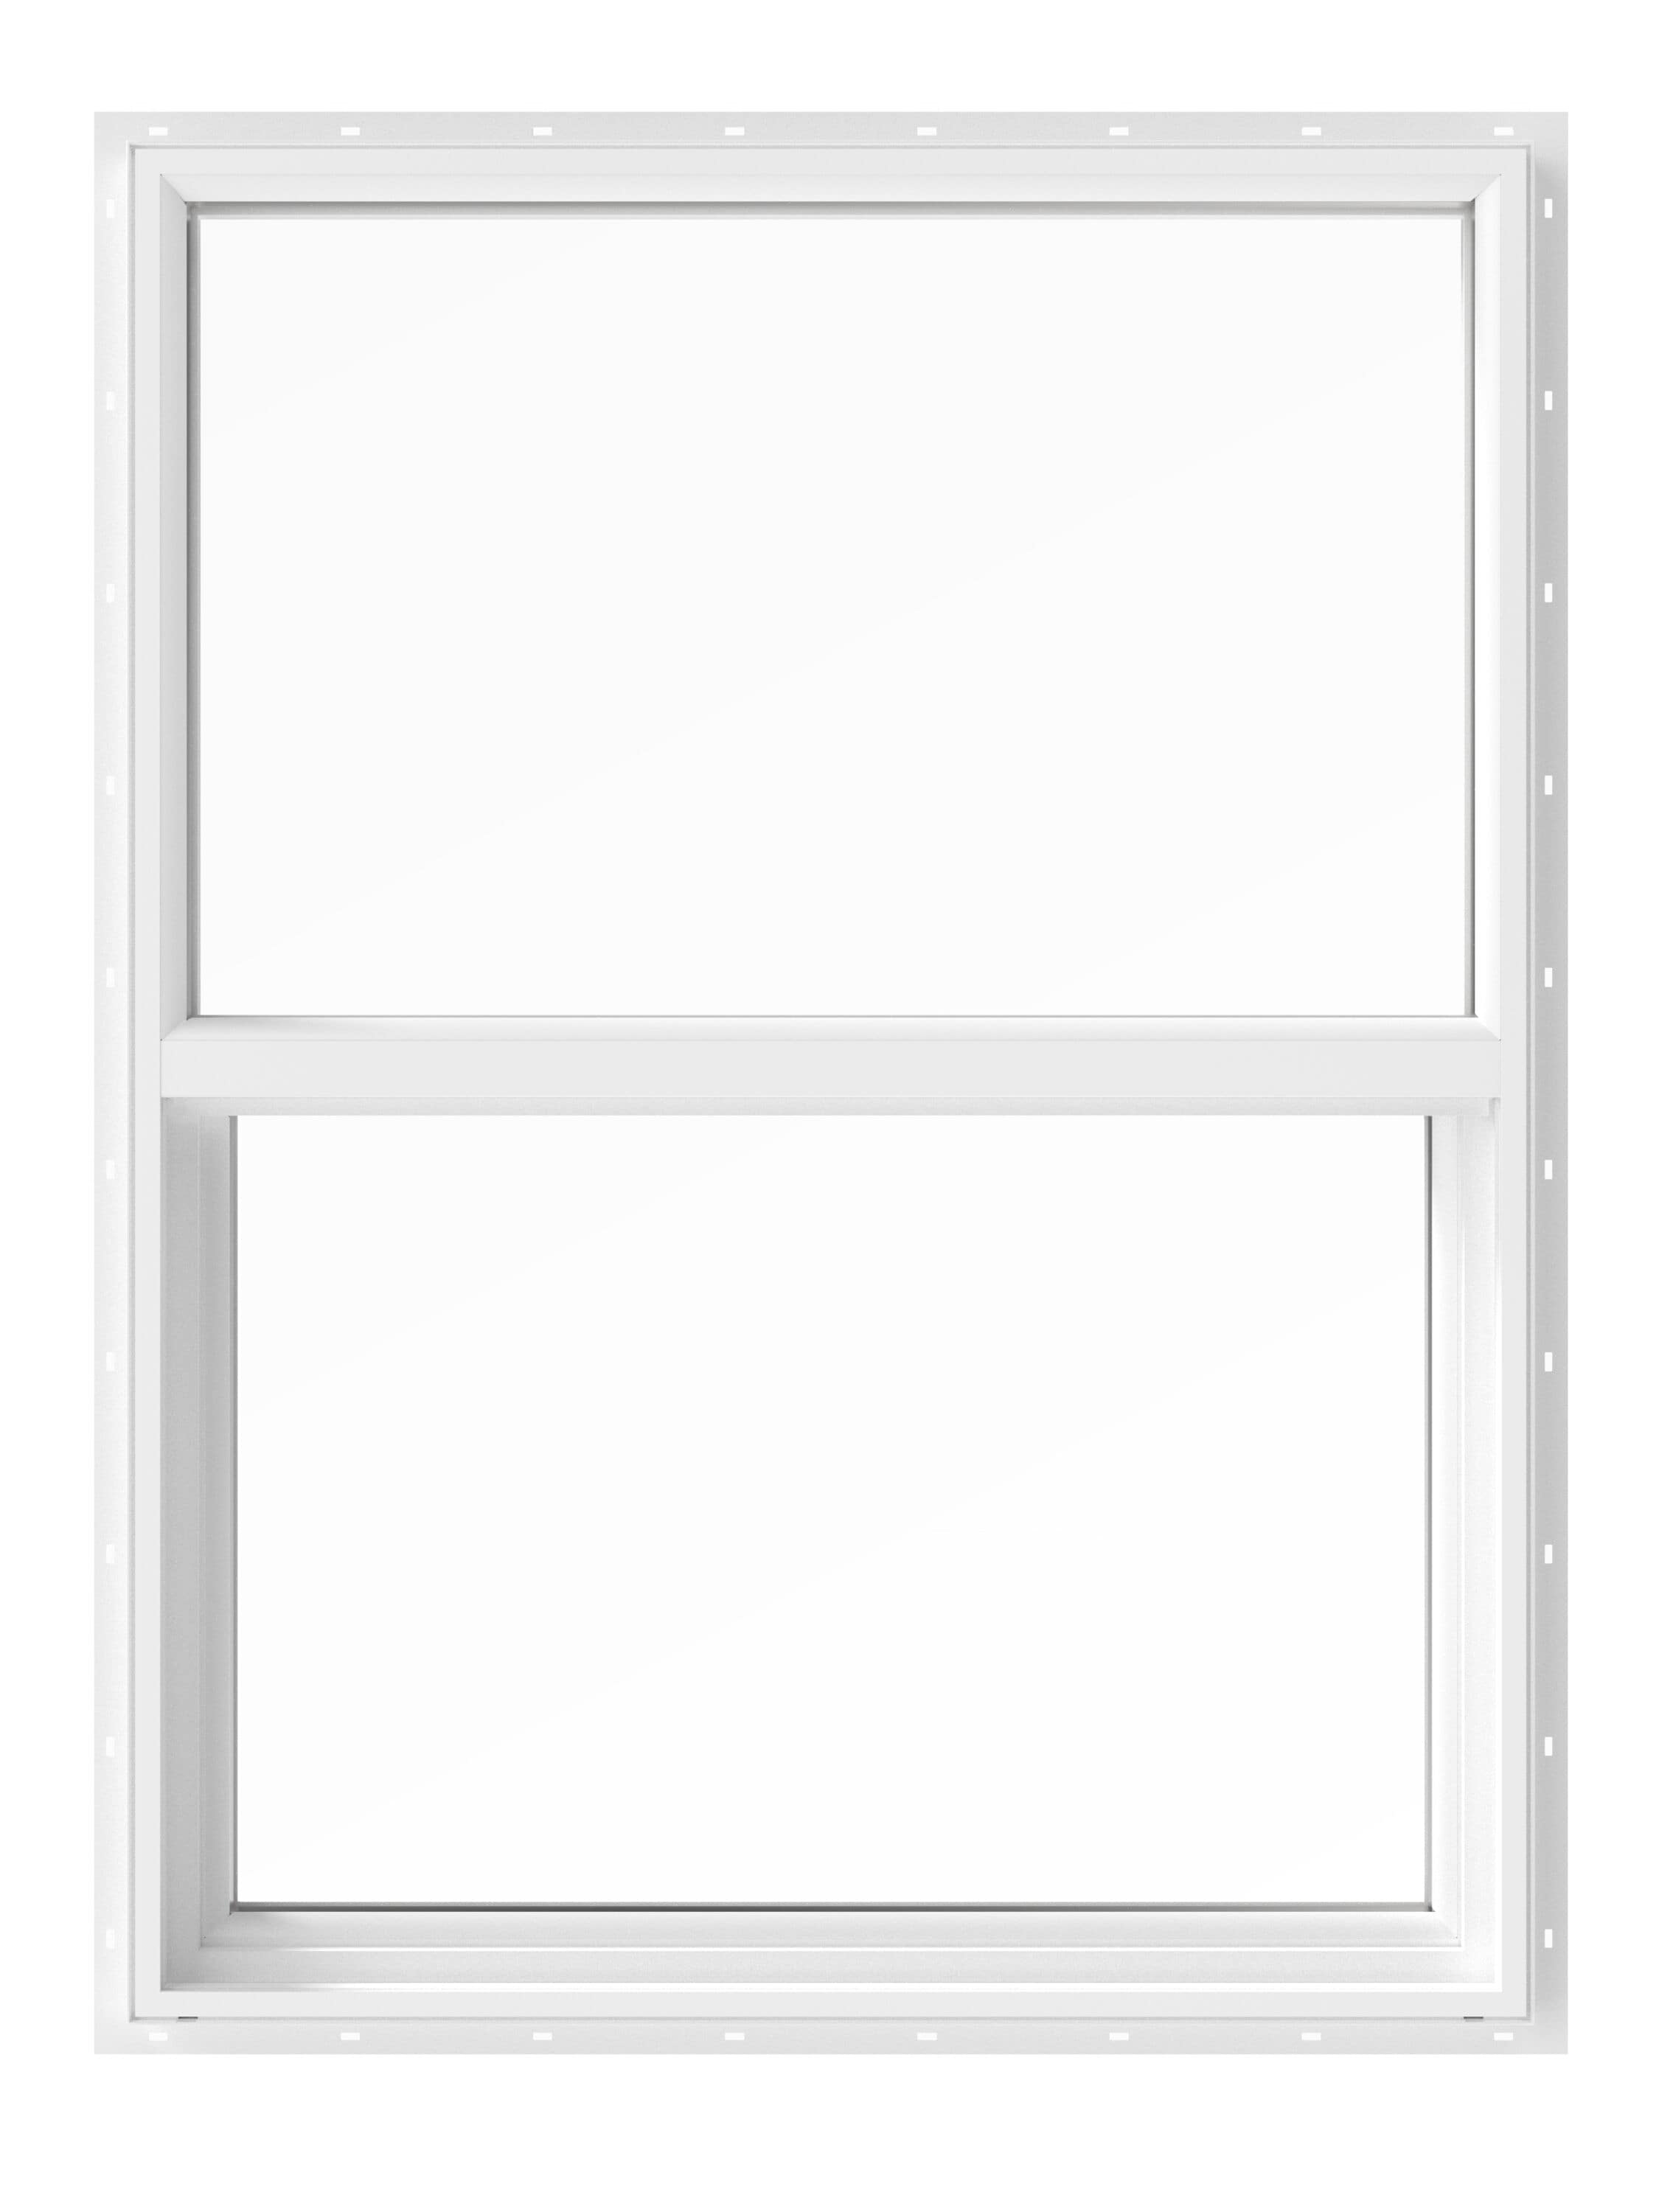 150 Series New Construction 23.5-in x 35.5-in x 2.6875-in Jamb White Vinyl Dual-pane Single Hung Window Half Screen Included | - Pella 1000009901